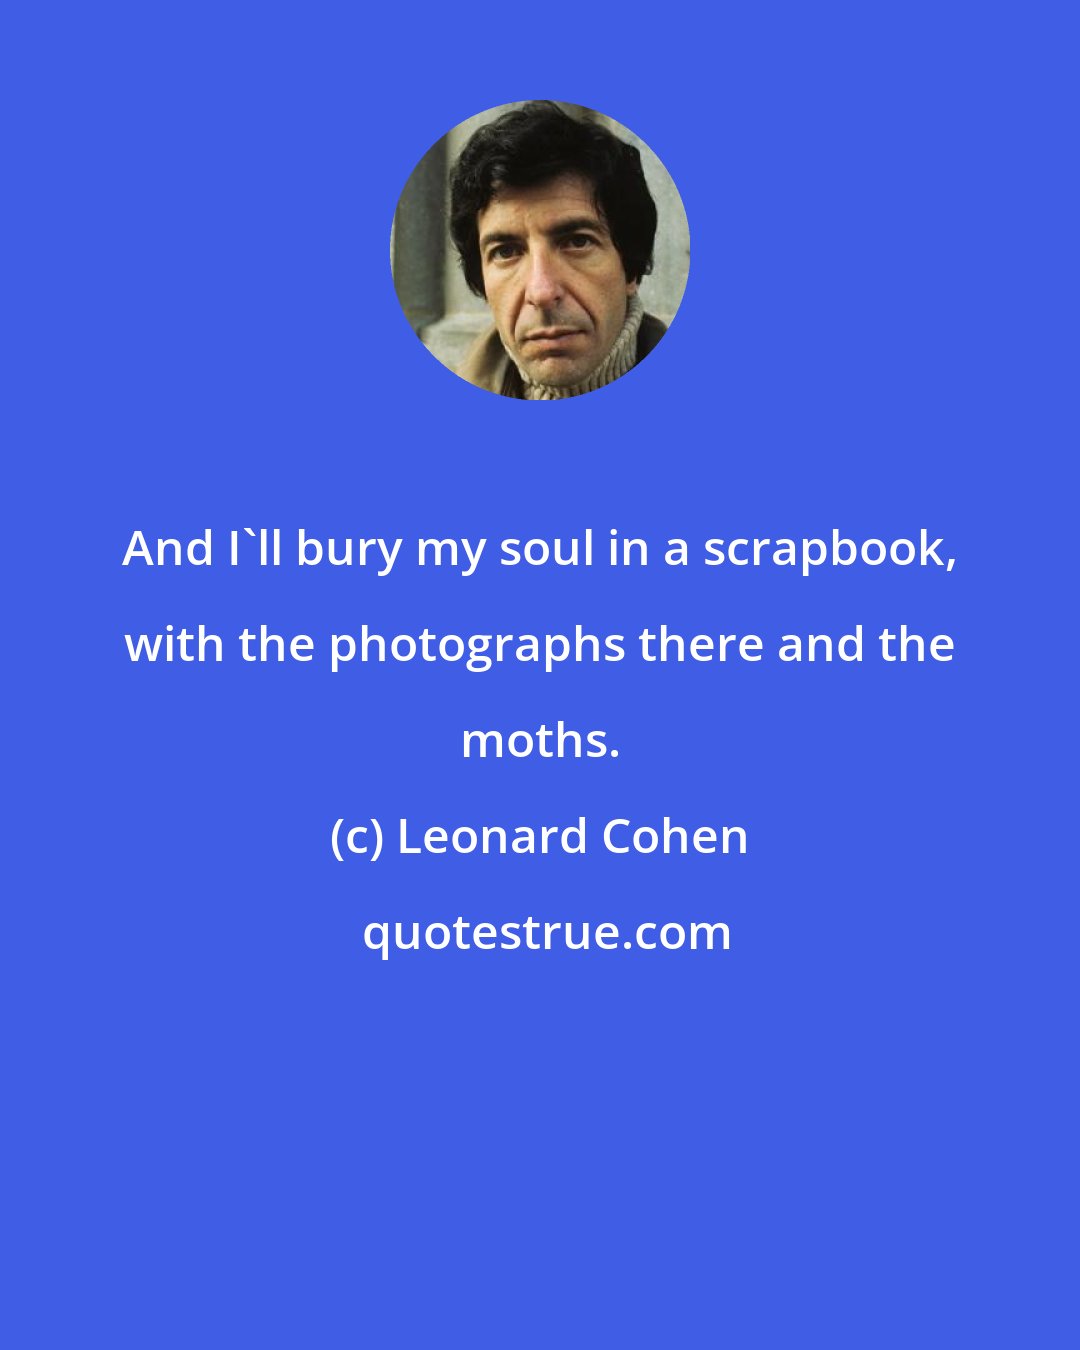 Leonard Cohen: And I'll bury my soul in a scrapbook, with the photographs there and the moths.